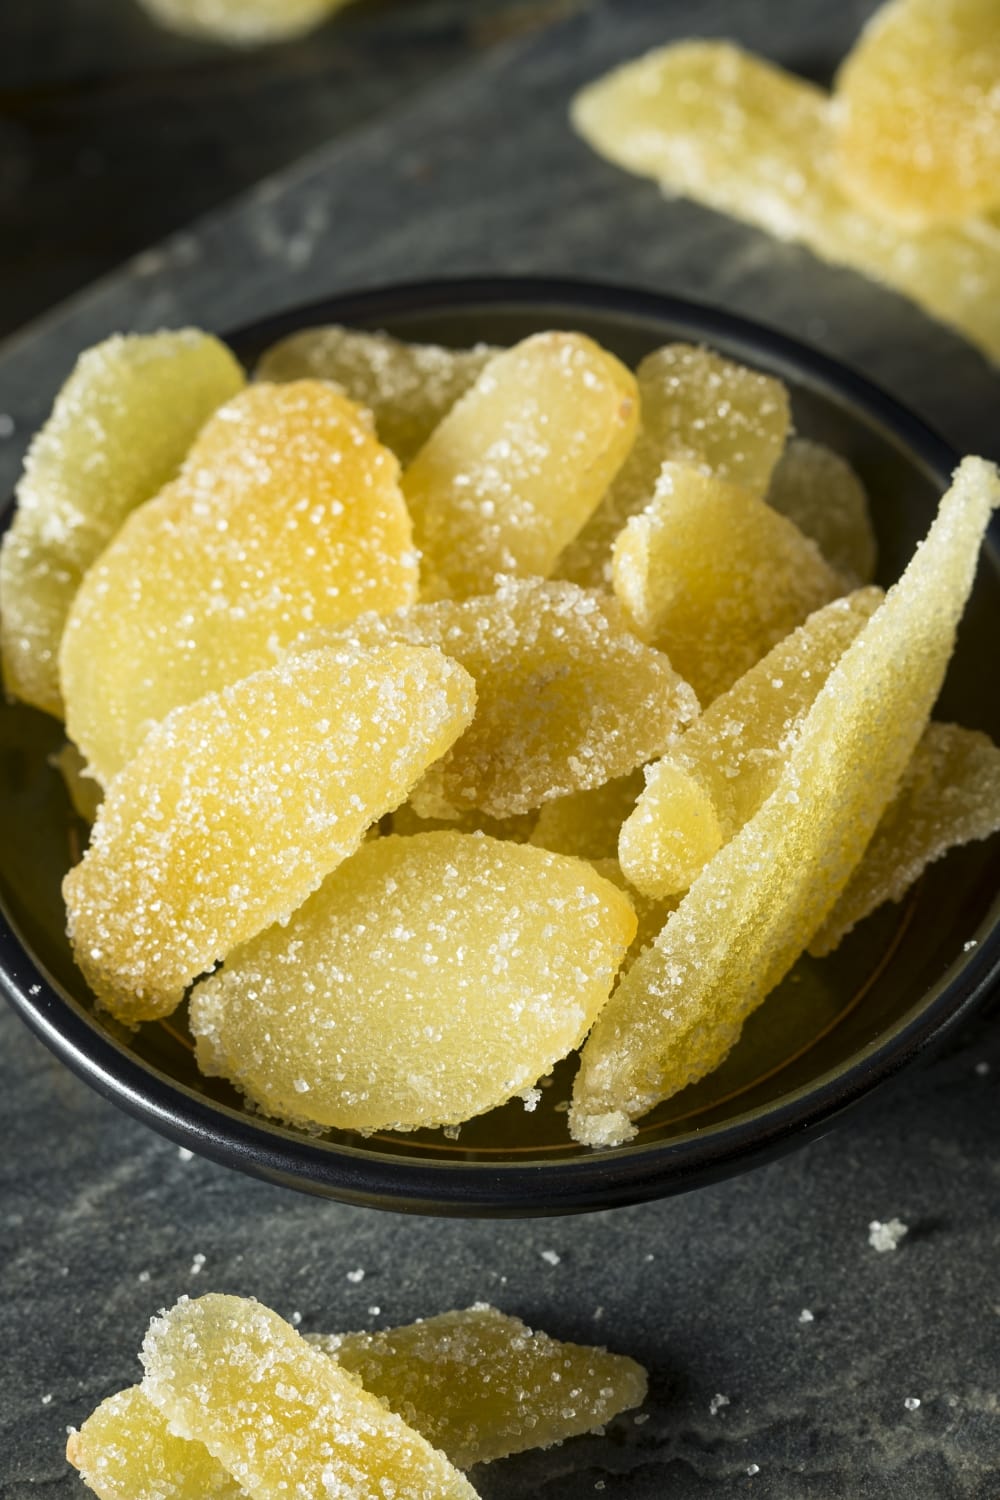 Crystalized Ginger Coated with White Sugar in a Small Container